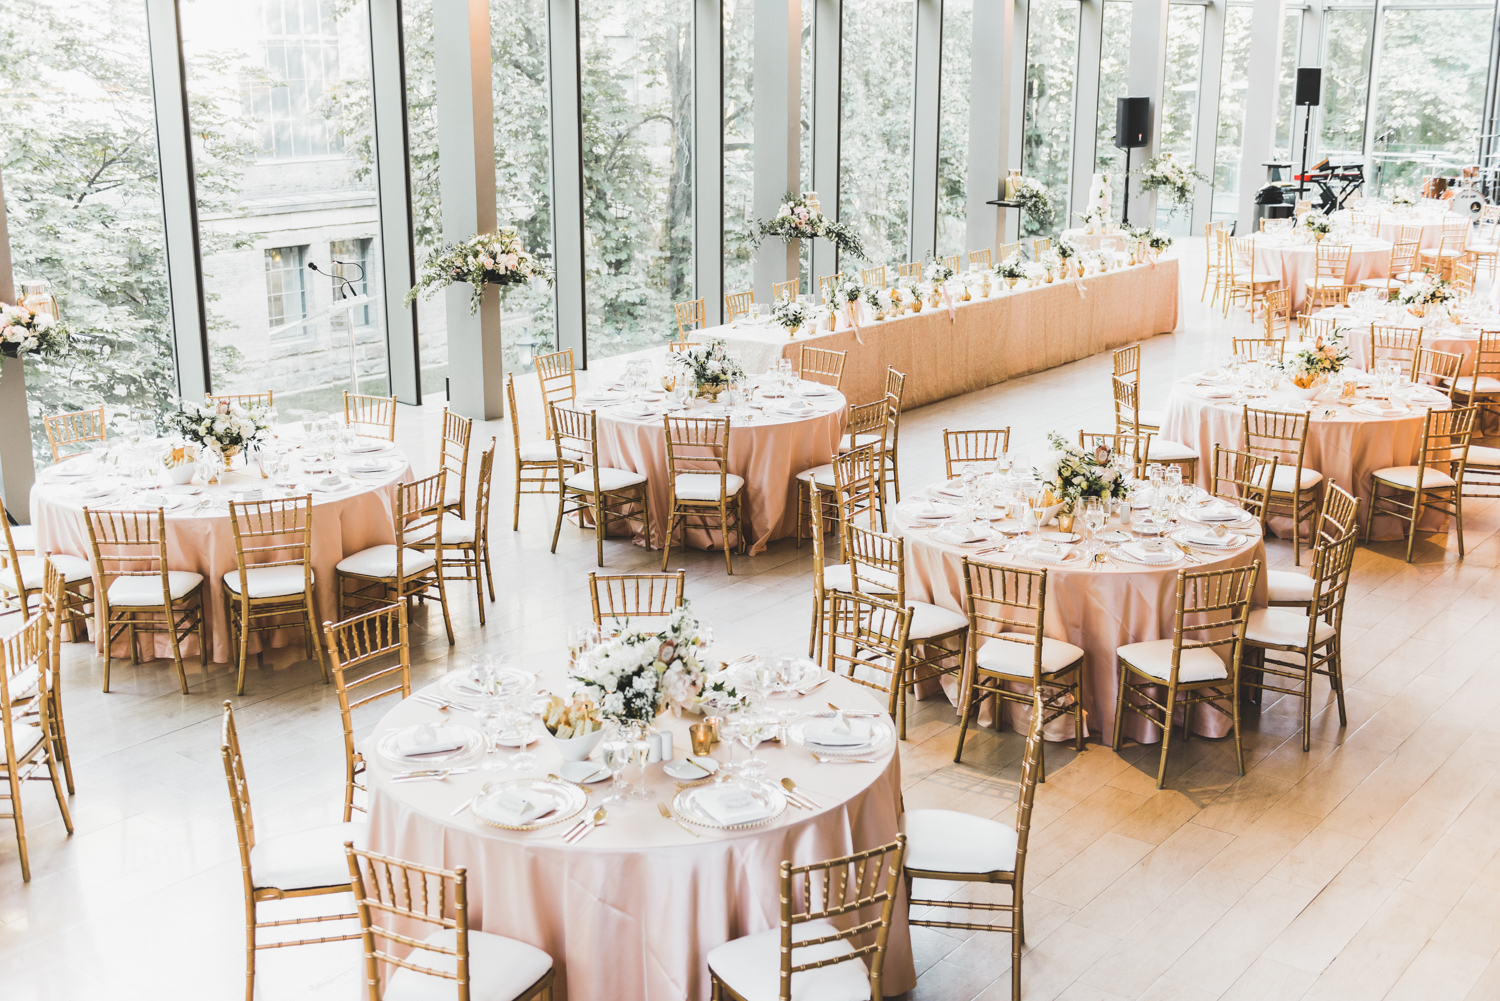 Royal Conservatory of Music - Best Wedding Venues in Toronto